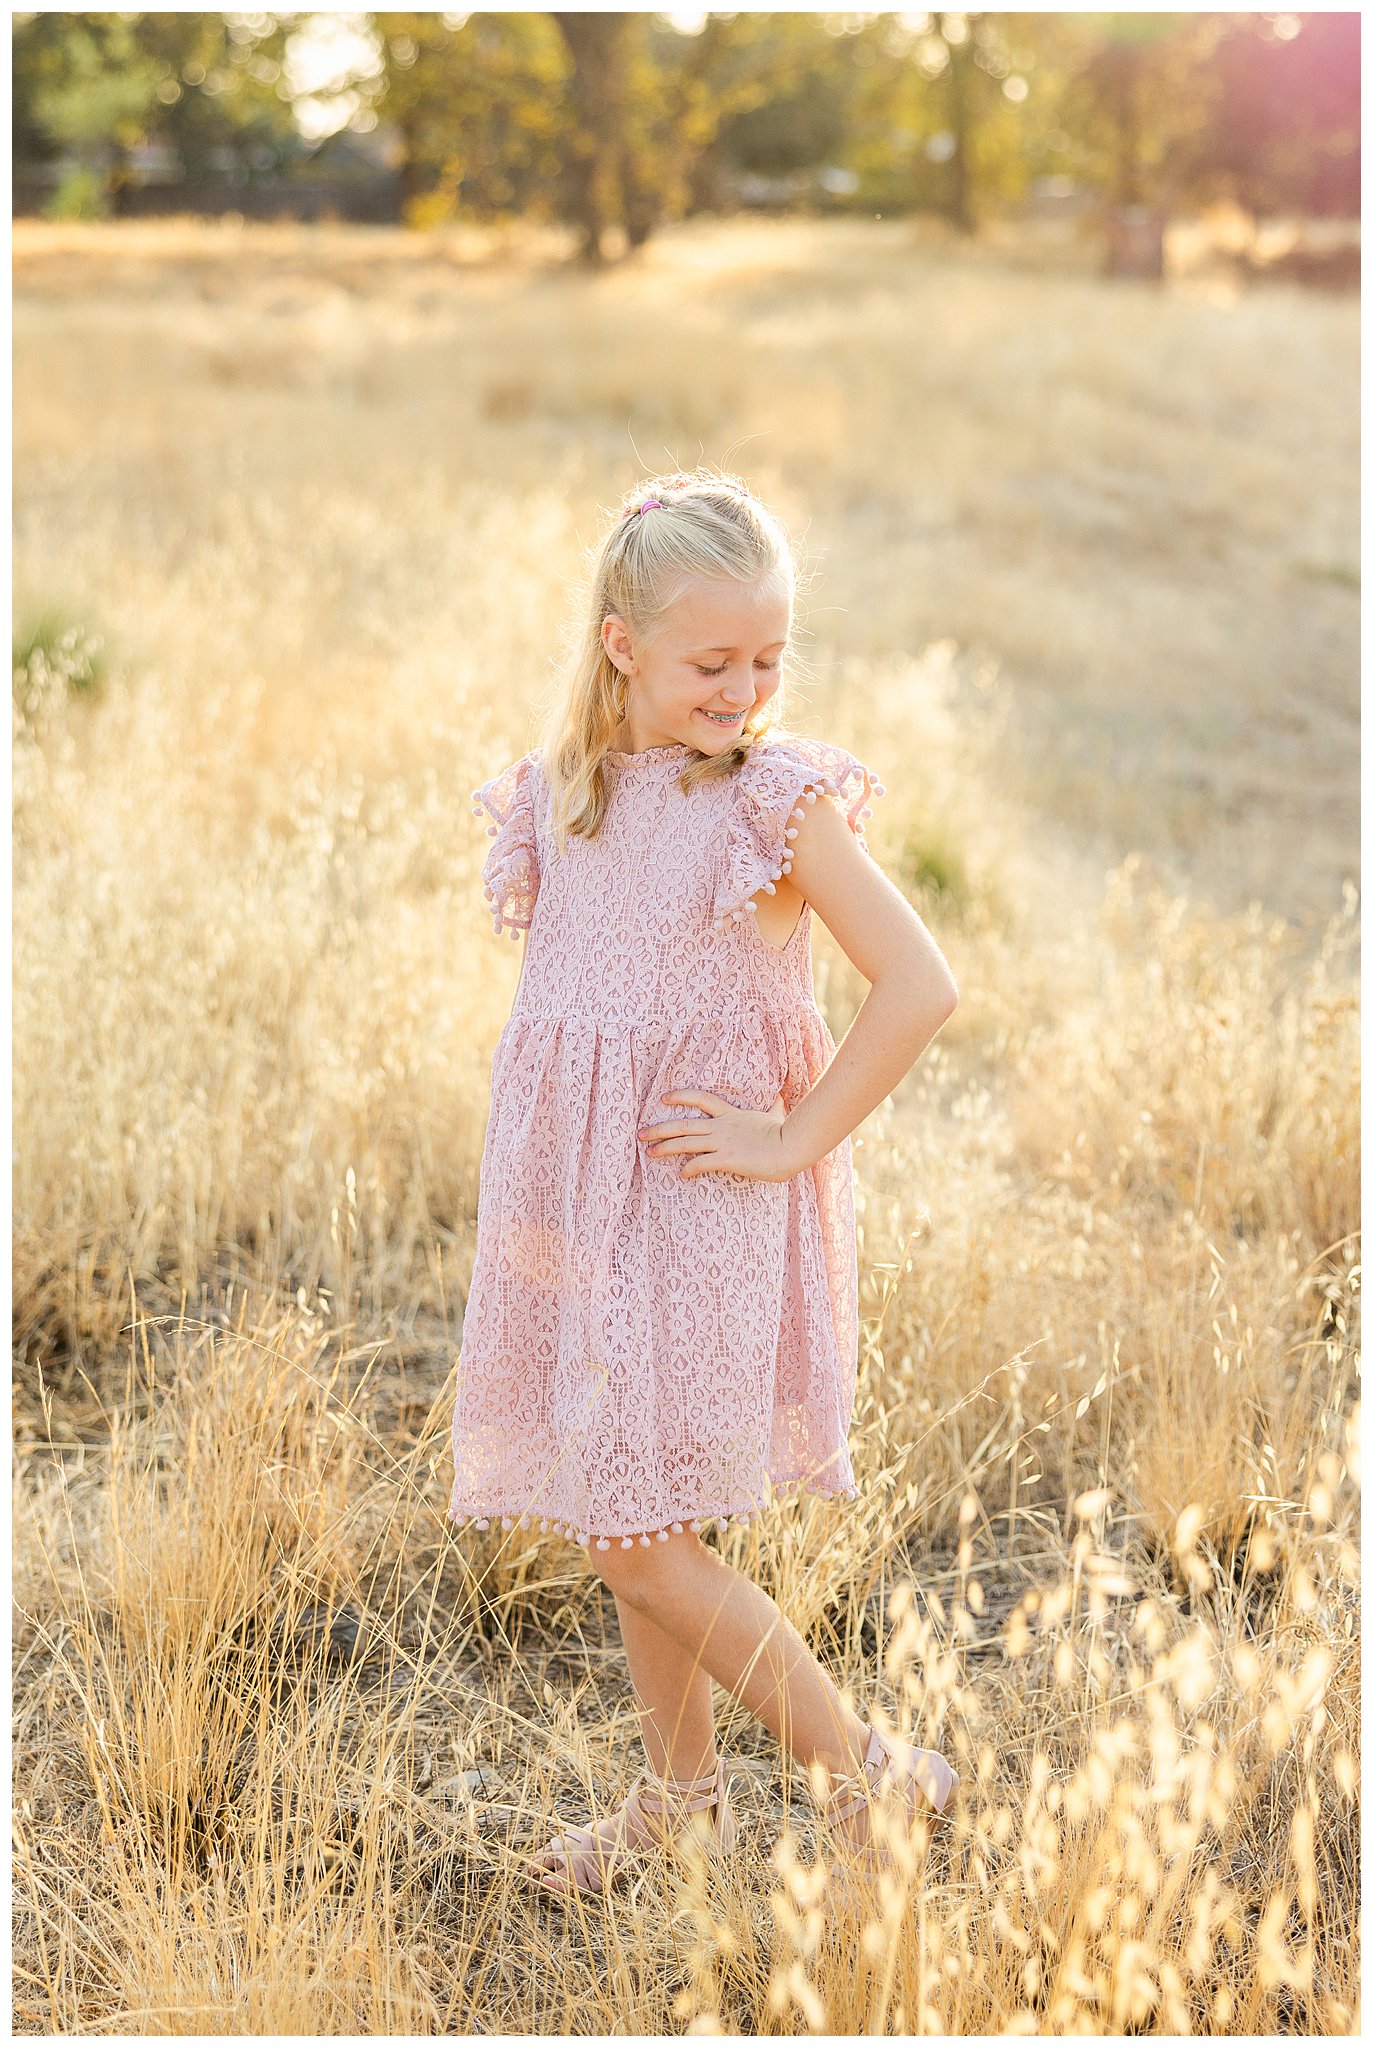 Mother Daughter Session in Grass Filed | Liz + Daughter